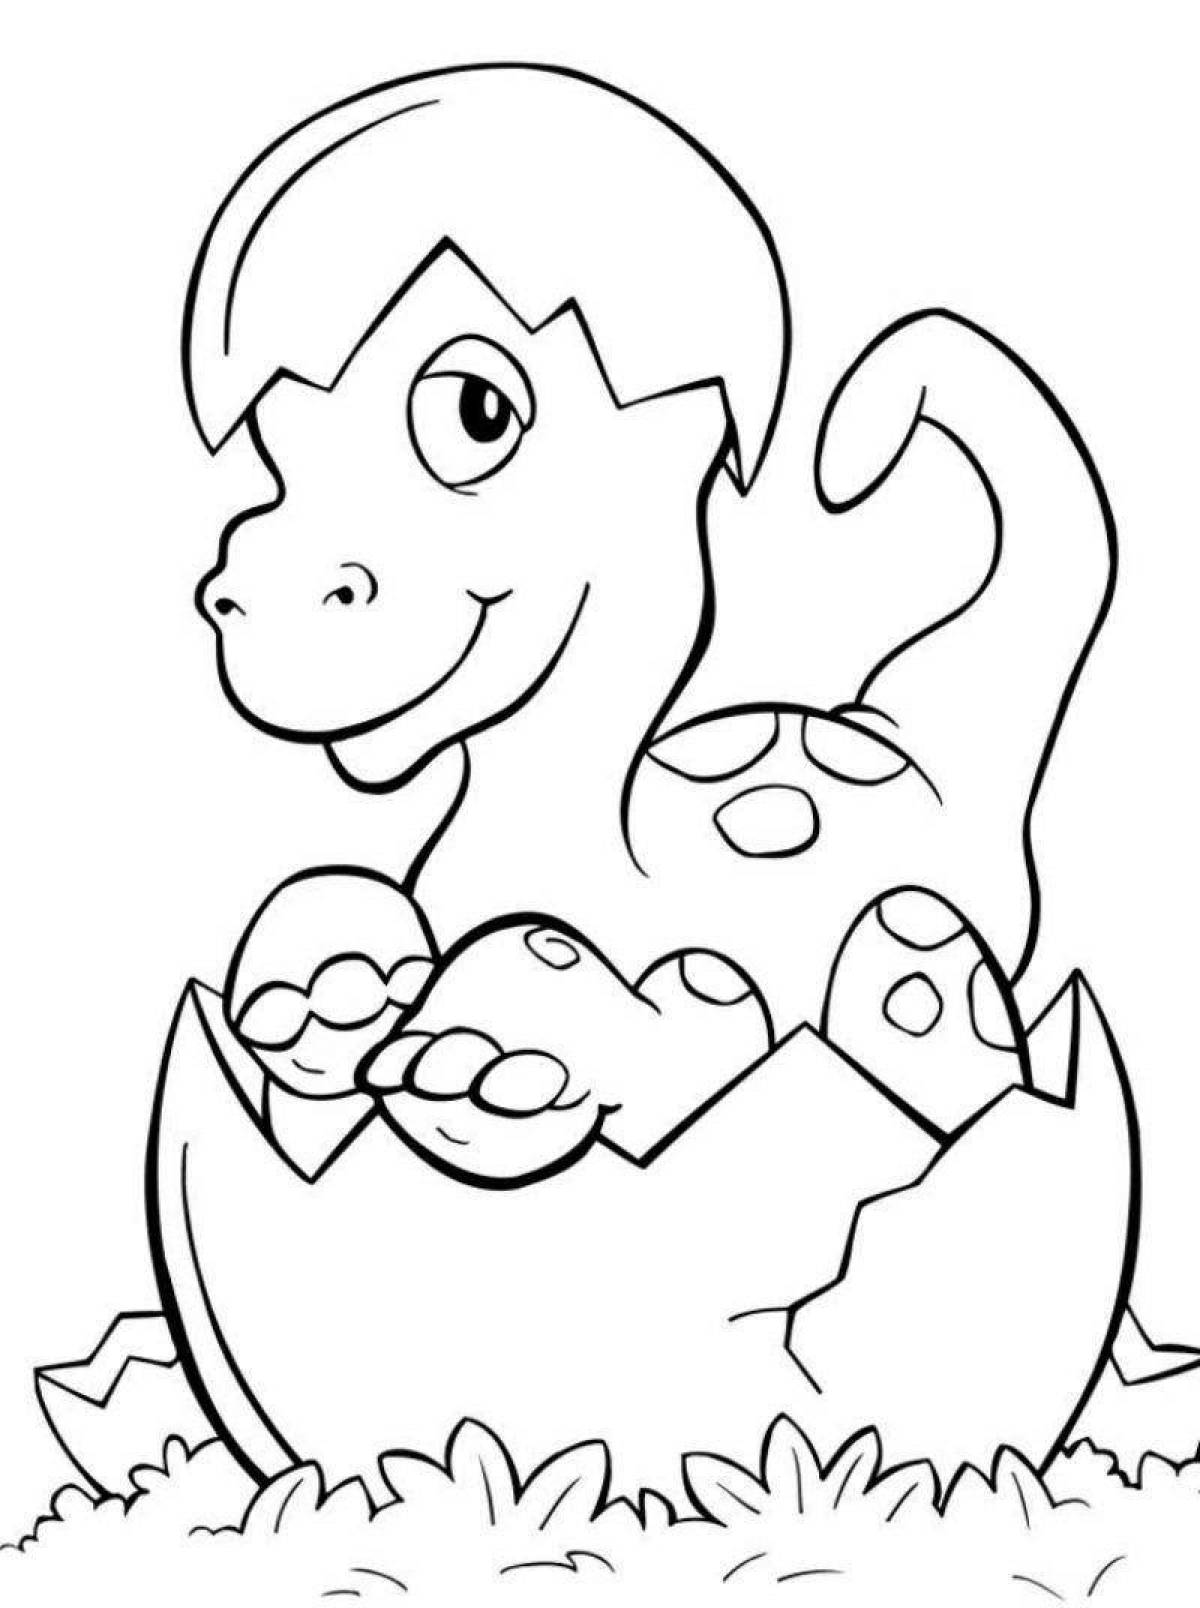 Awesome dinosaur coloring pages for kids